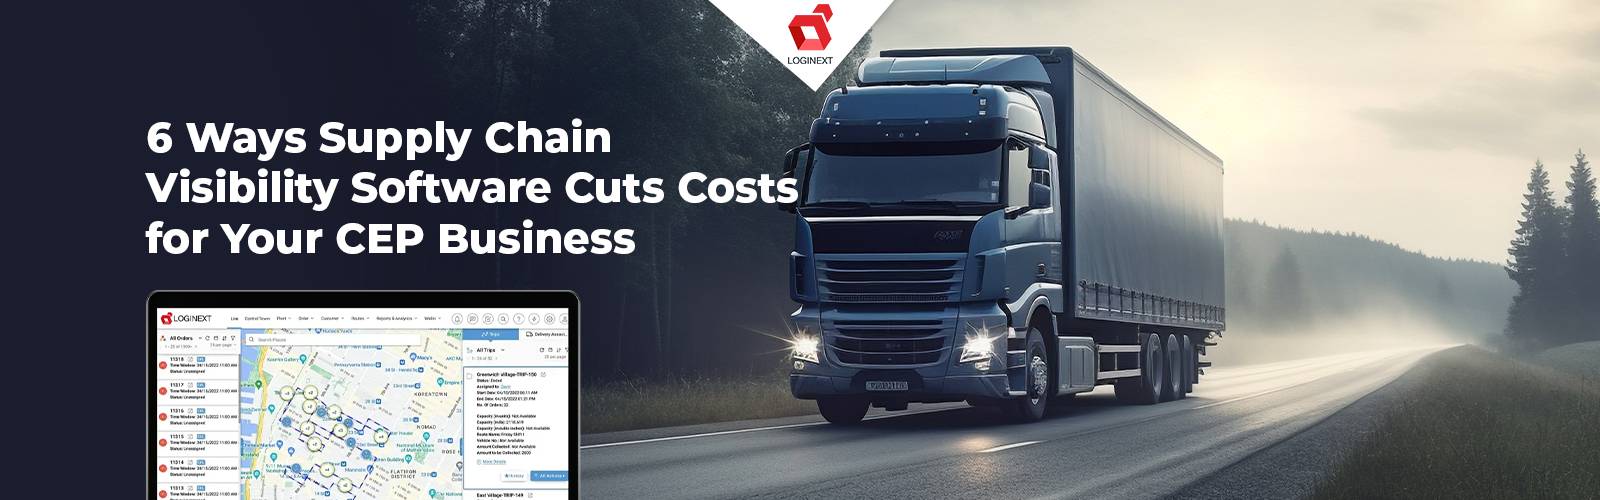 Cut CEP Costs Using This Supply Chain Visibility Software